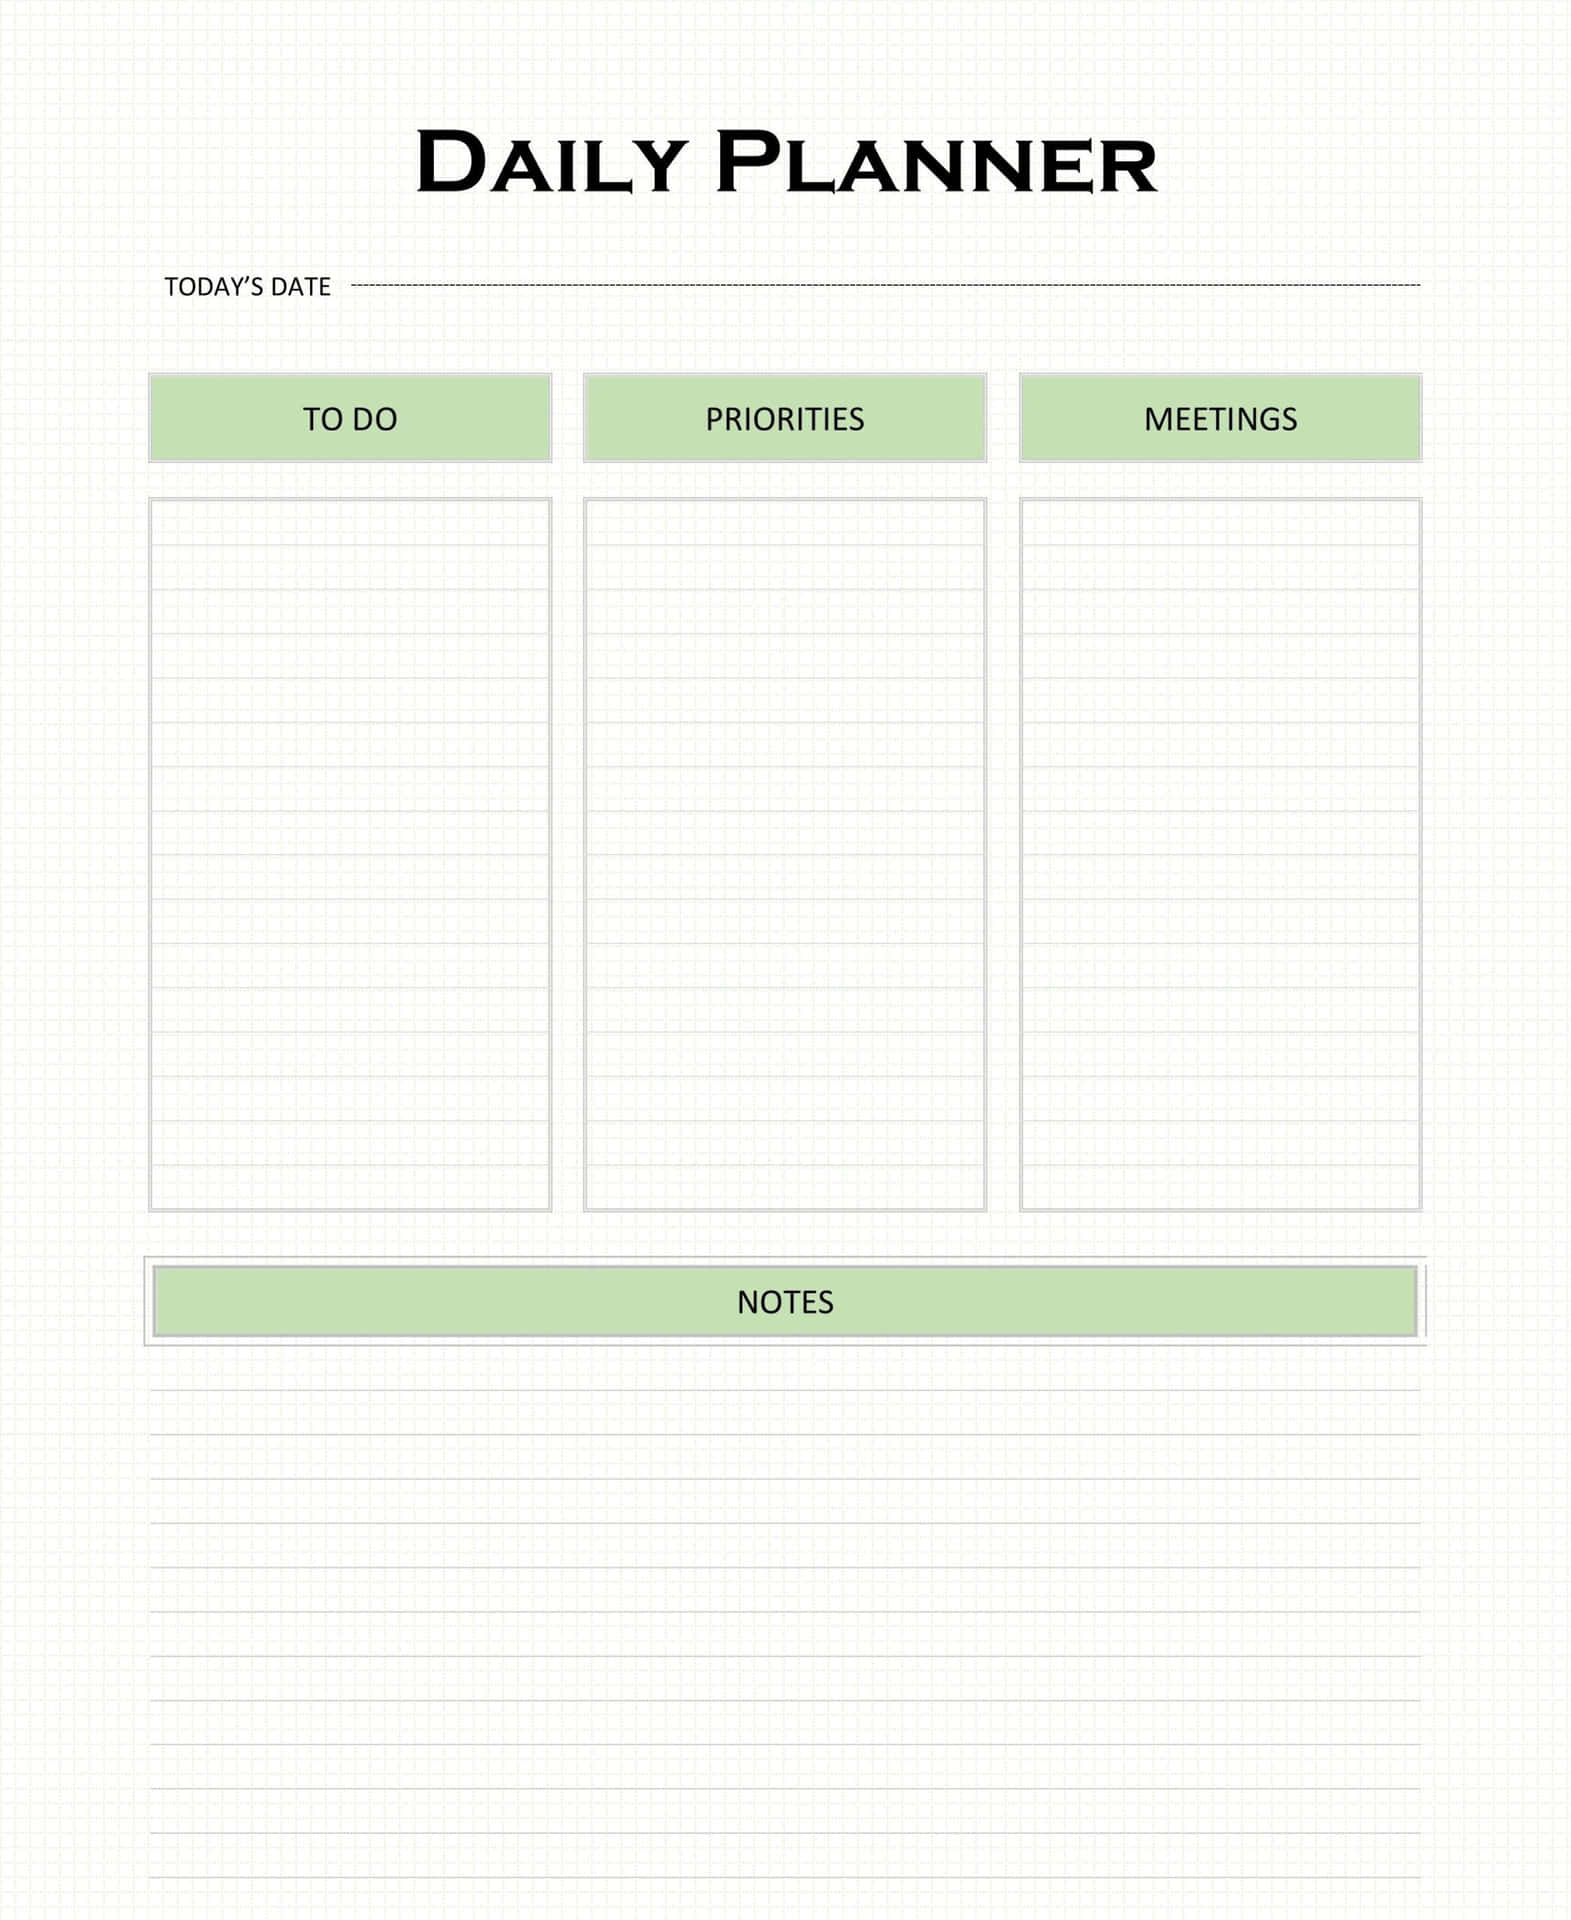 Organize Your Day and Reach Goals with the Right Planner